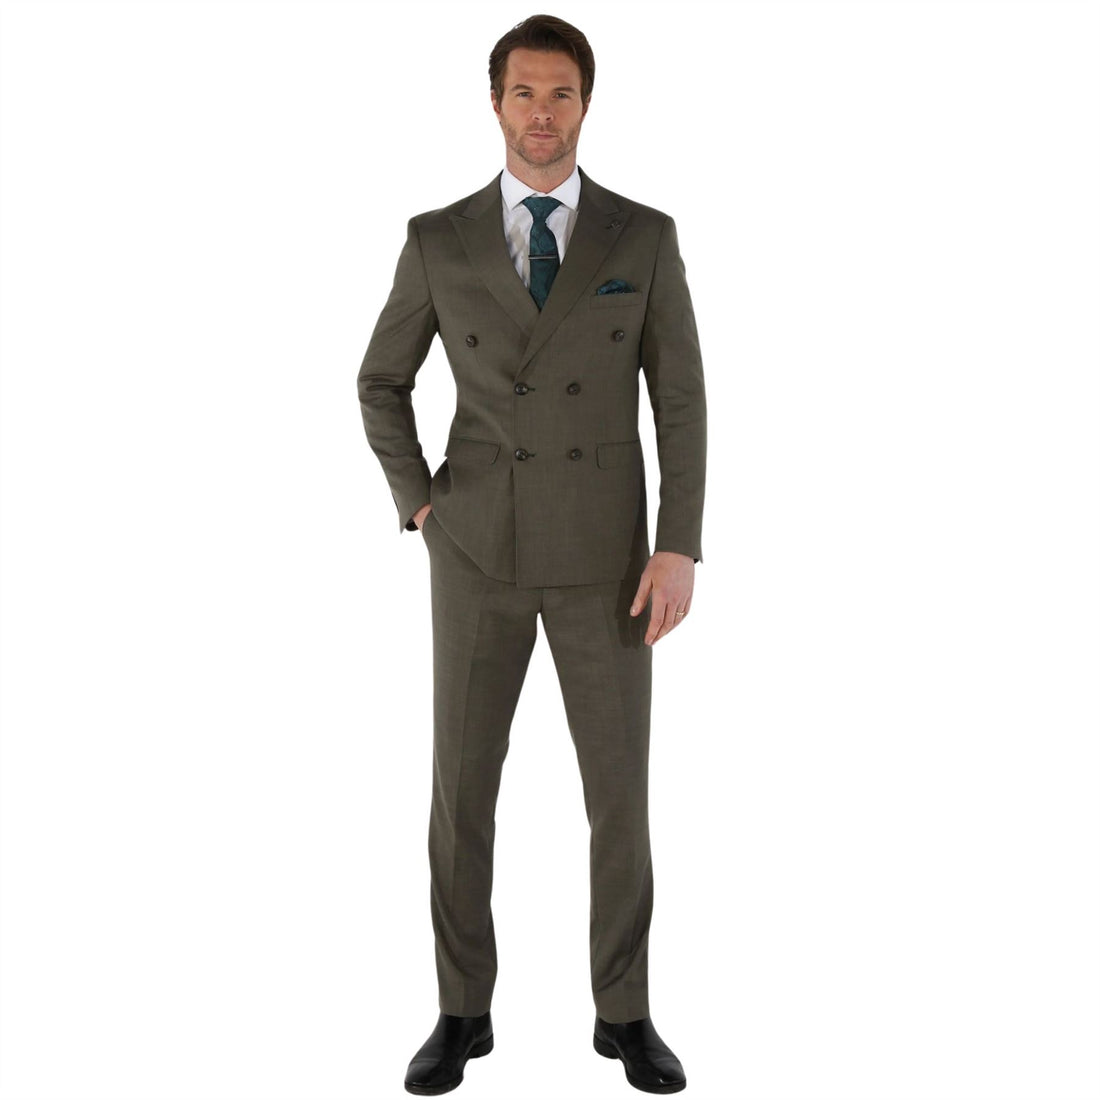 Men's Suit 2 Piece Sage Green Double Breasted Tailored Fit Summer Wedding